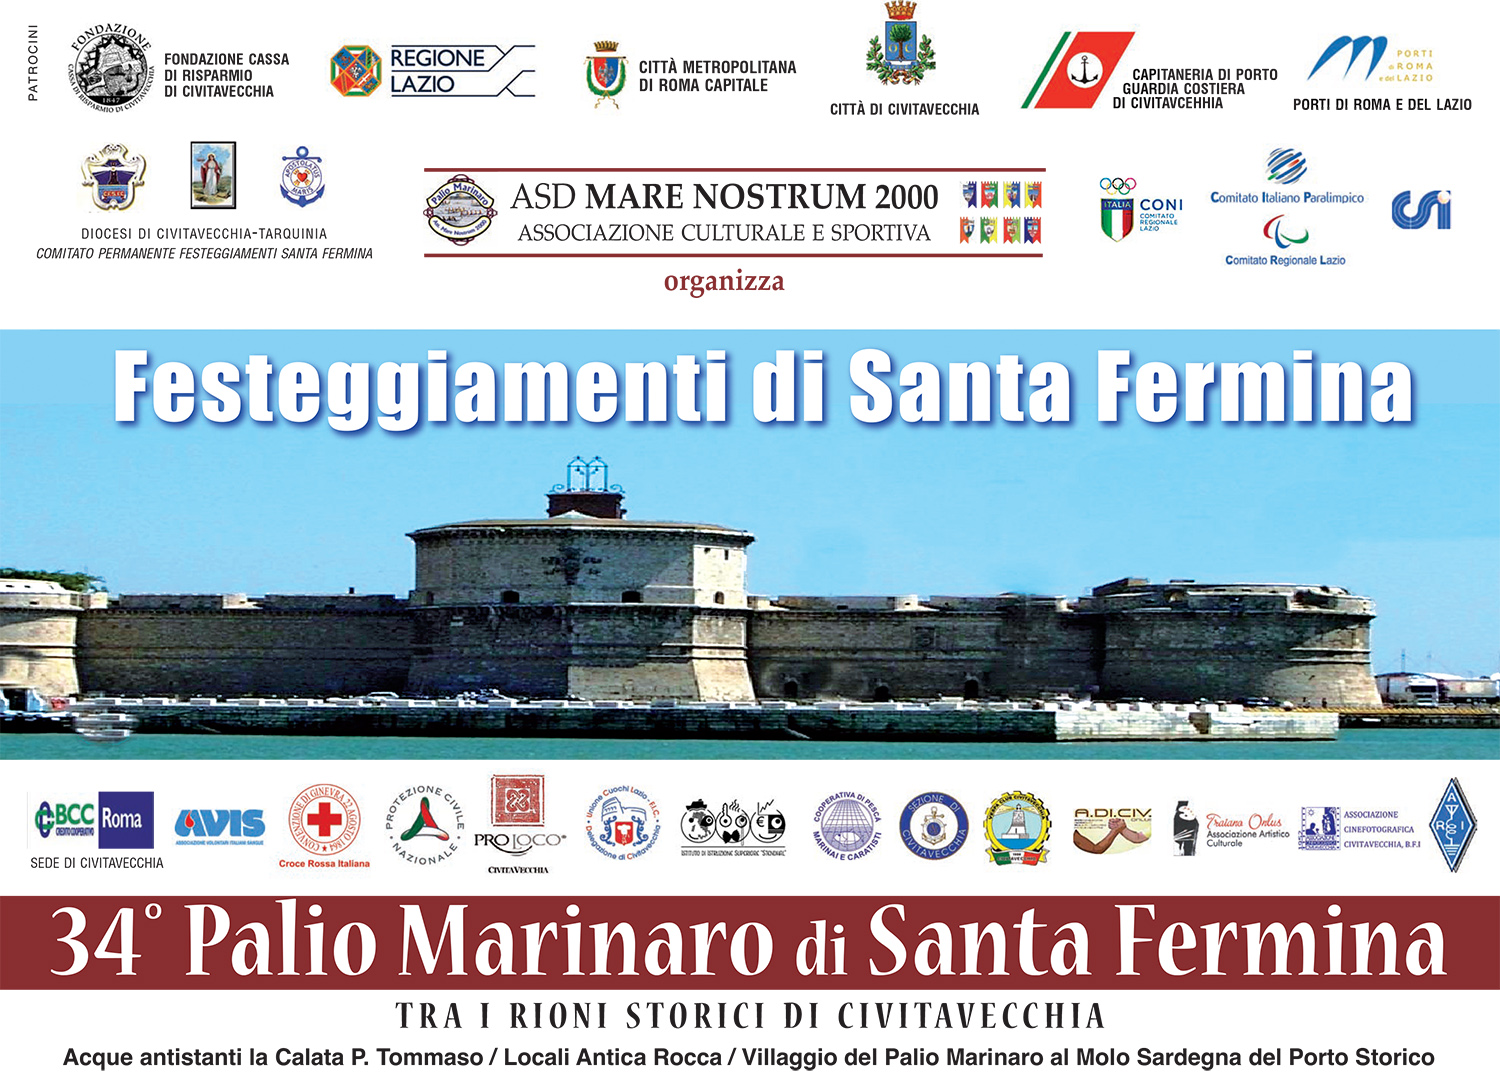 Poster of the 34th edition of the Nautical Palio of Santa Fermina at the Port of Civitavecchia